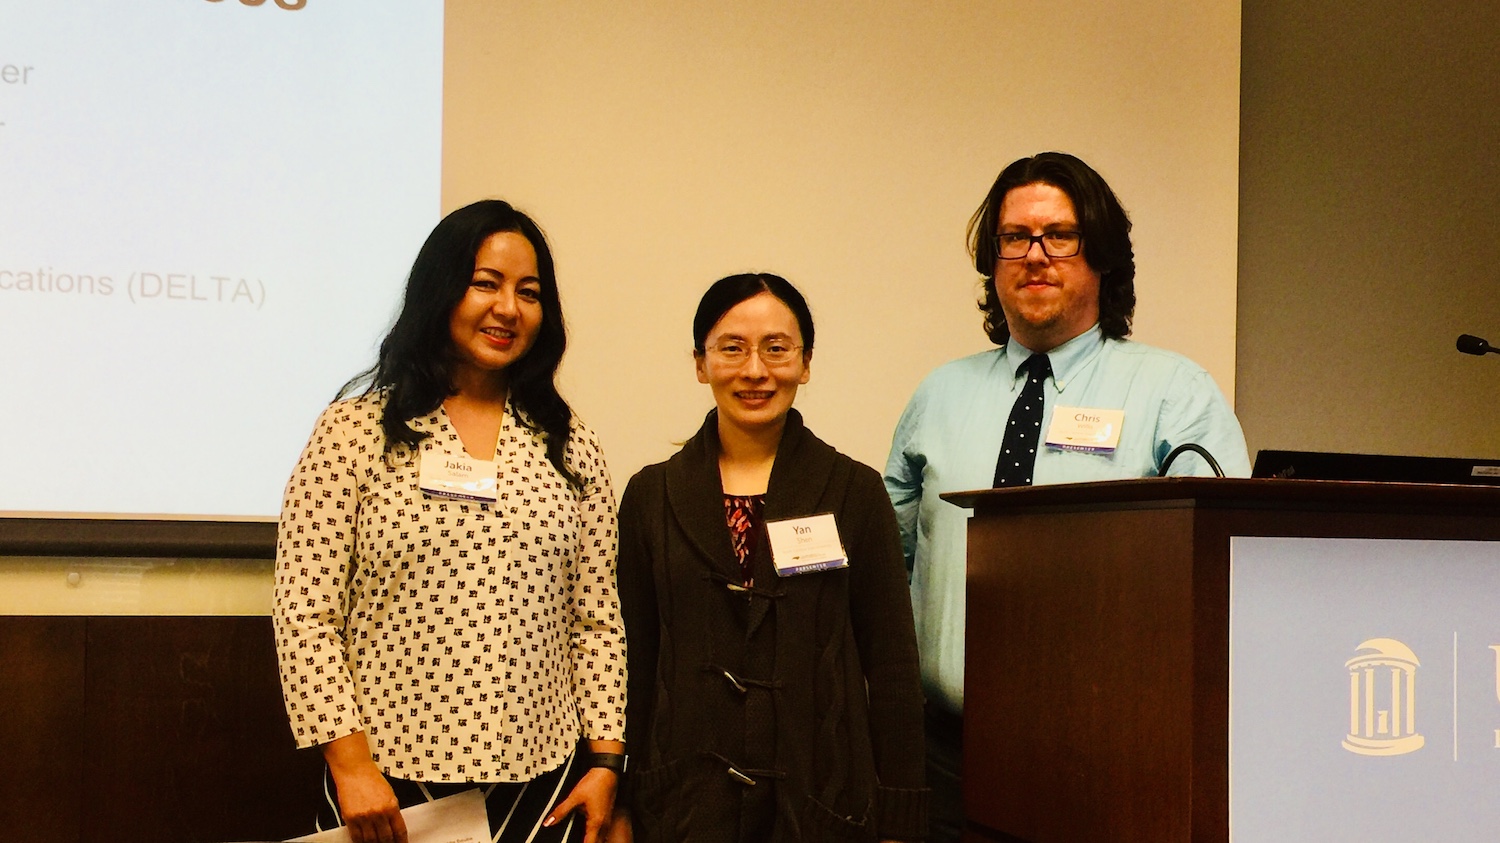 DELTA Staff members (left to right) Jakia Salam, Yan Shen and Chris Willis at the 2019 UNC System Student Success Conference. The group is standing in front of a screen and behind a podium at the conference.